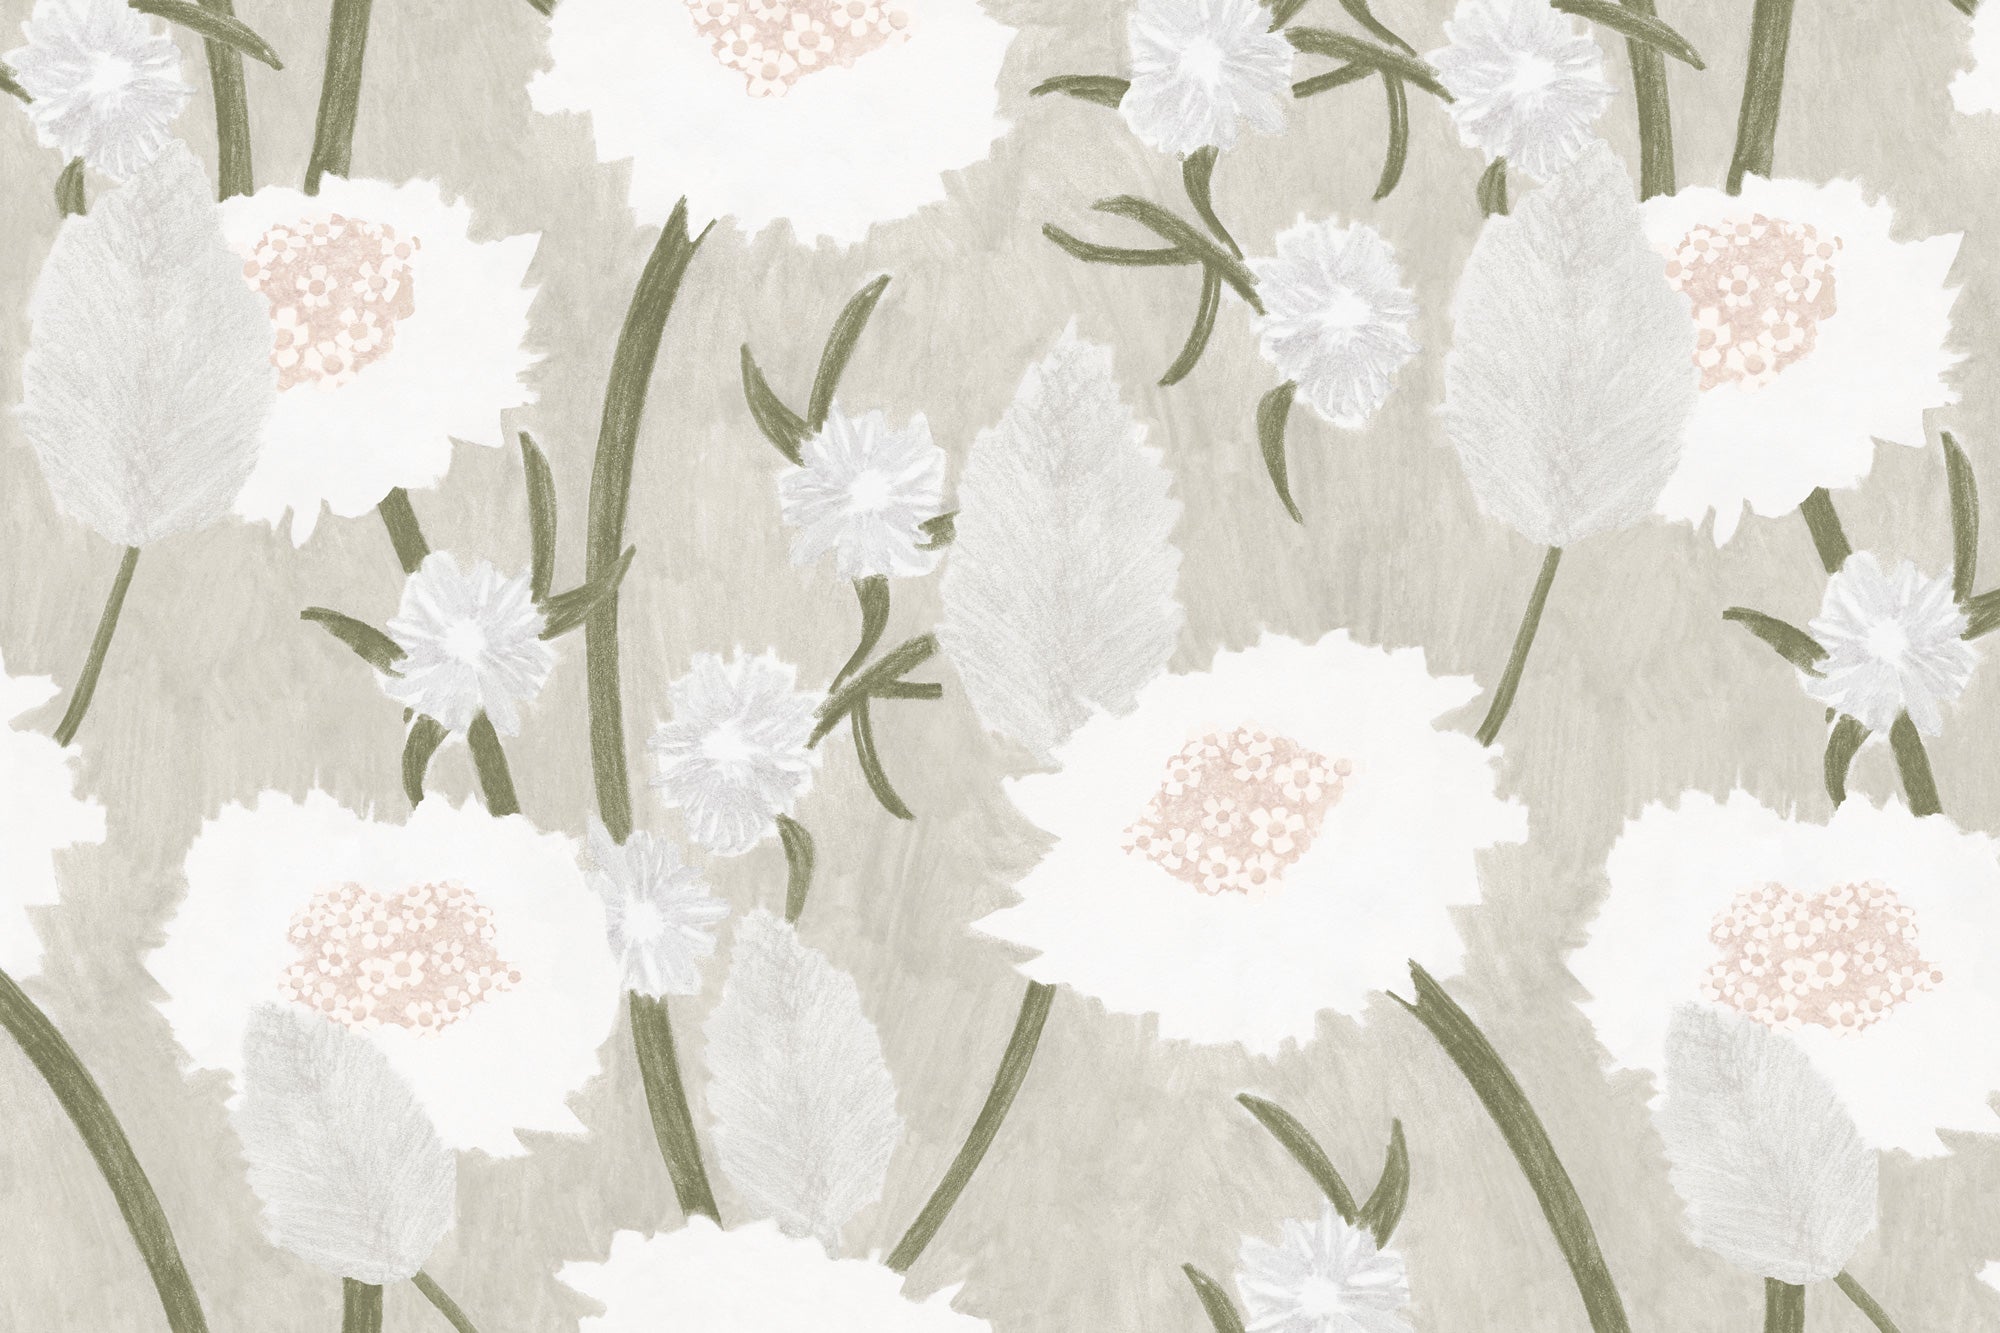 Detail of wallpaper in a playful floral print in shades of white, olive and gray on a cream field.